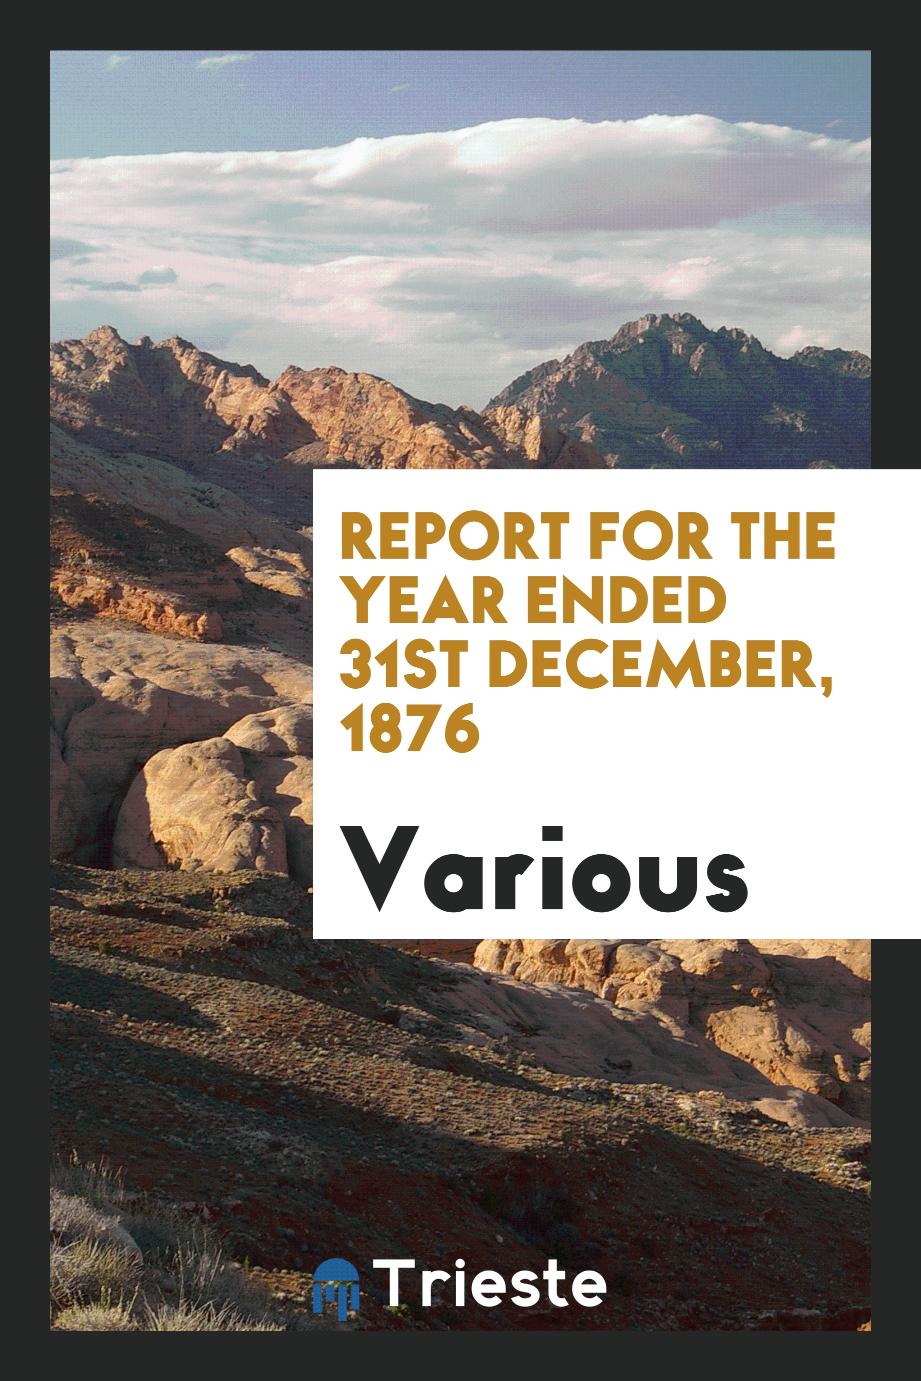 Report for the Year ended 31st December, 1876